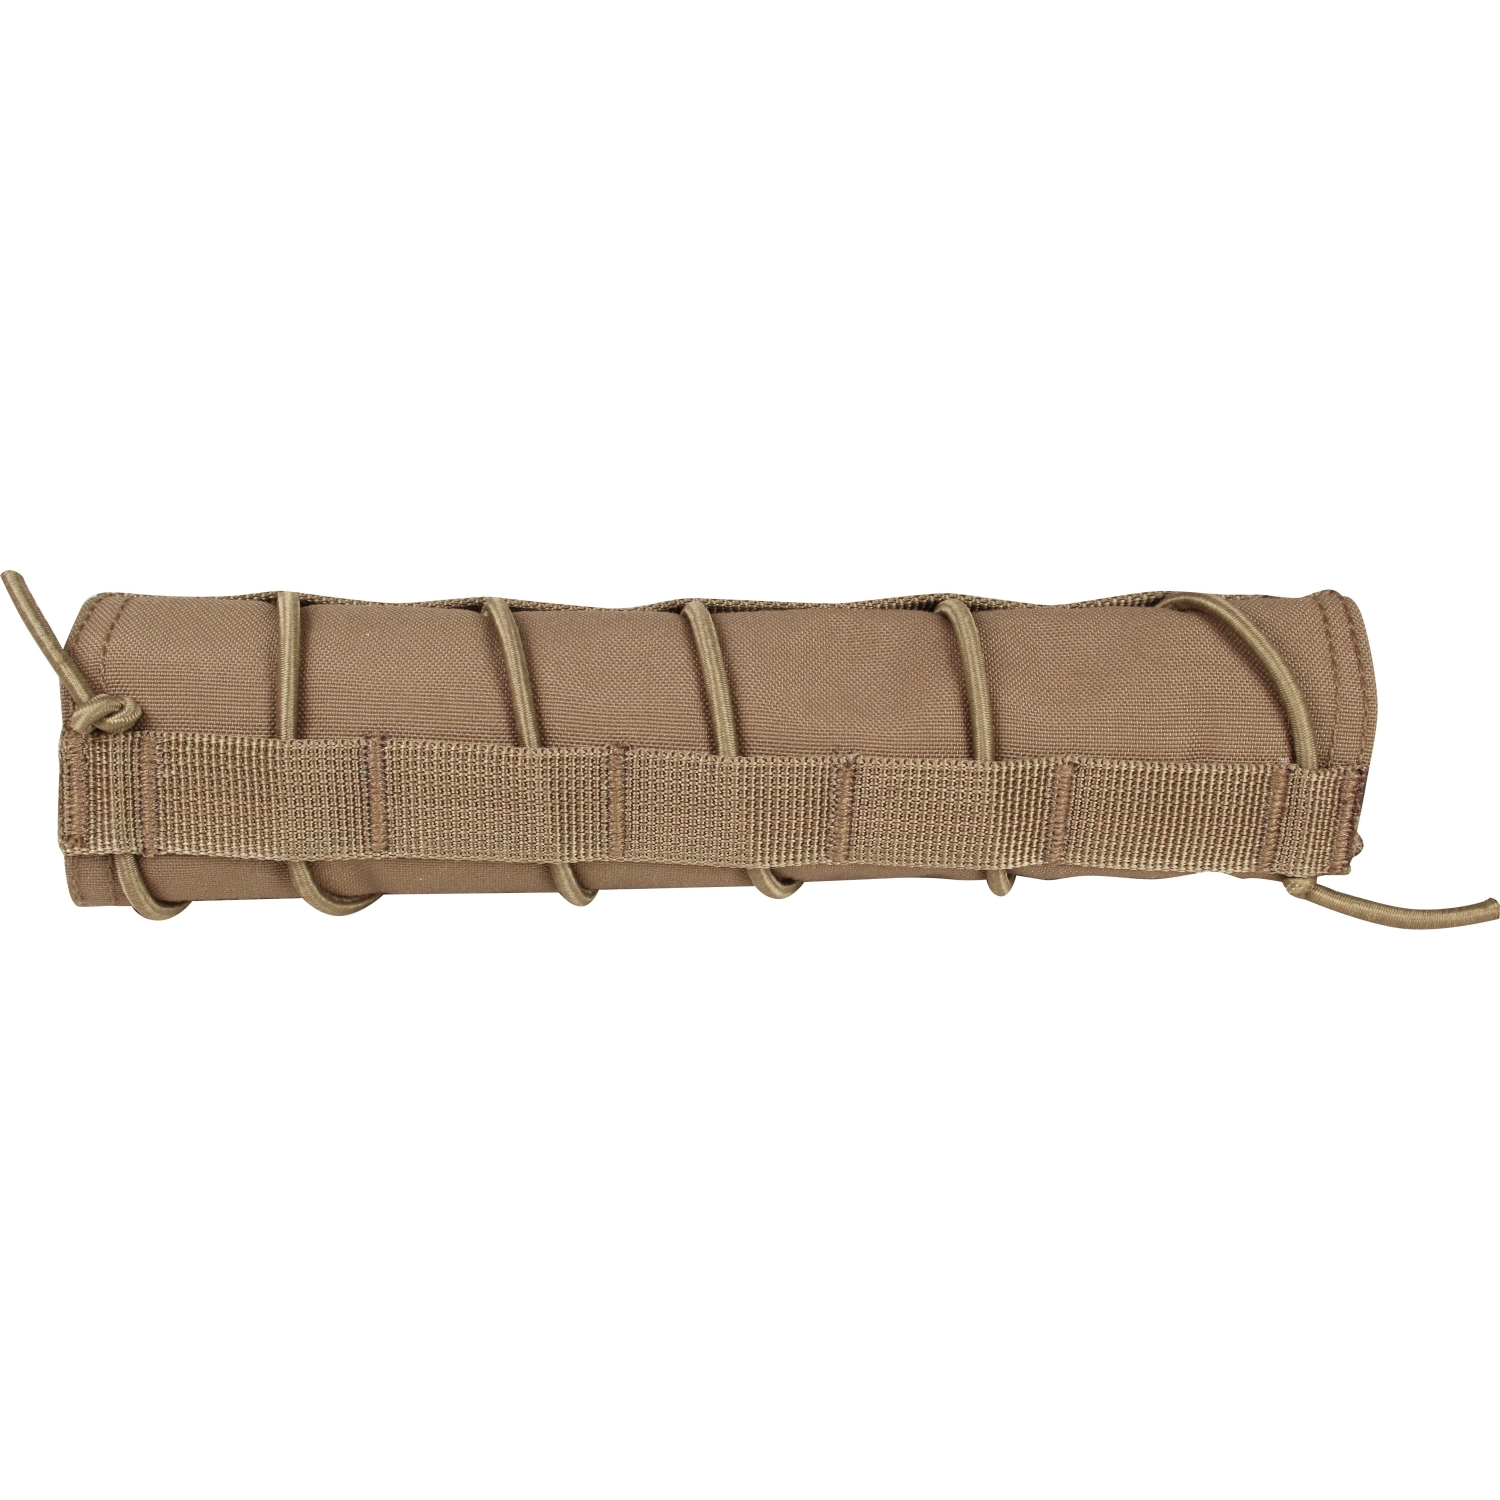 Viper Tactical Moderator Cover Covert Bungee Retention Silencer Sound Suppressor 